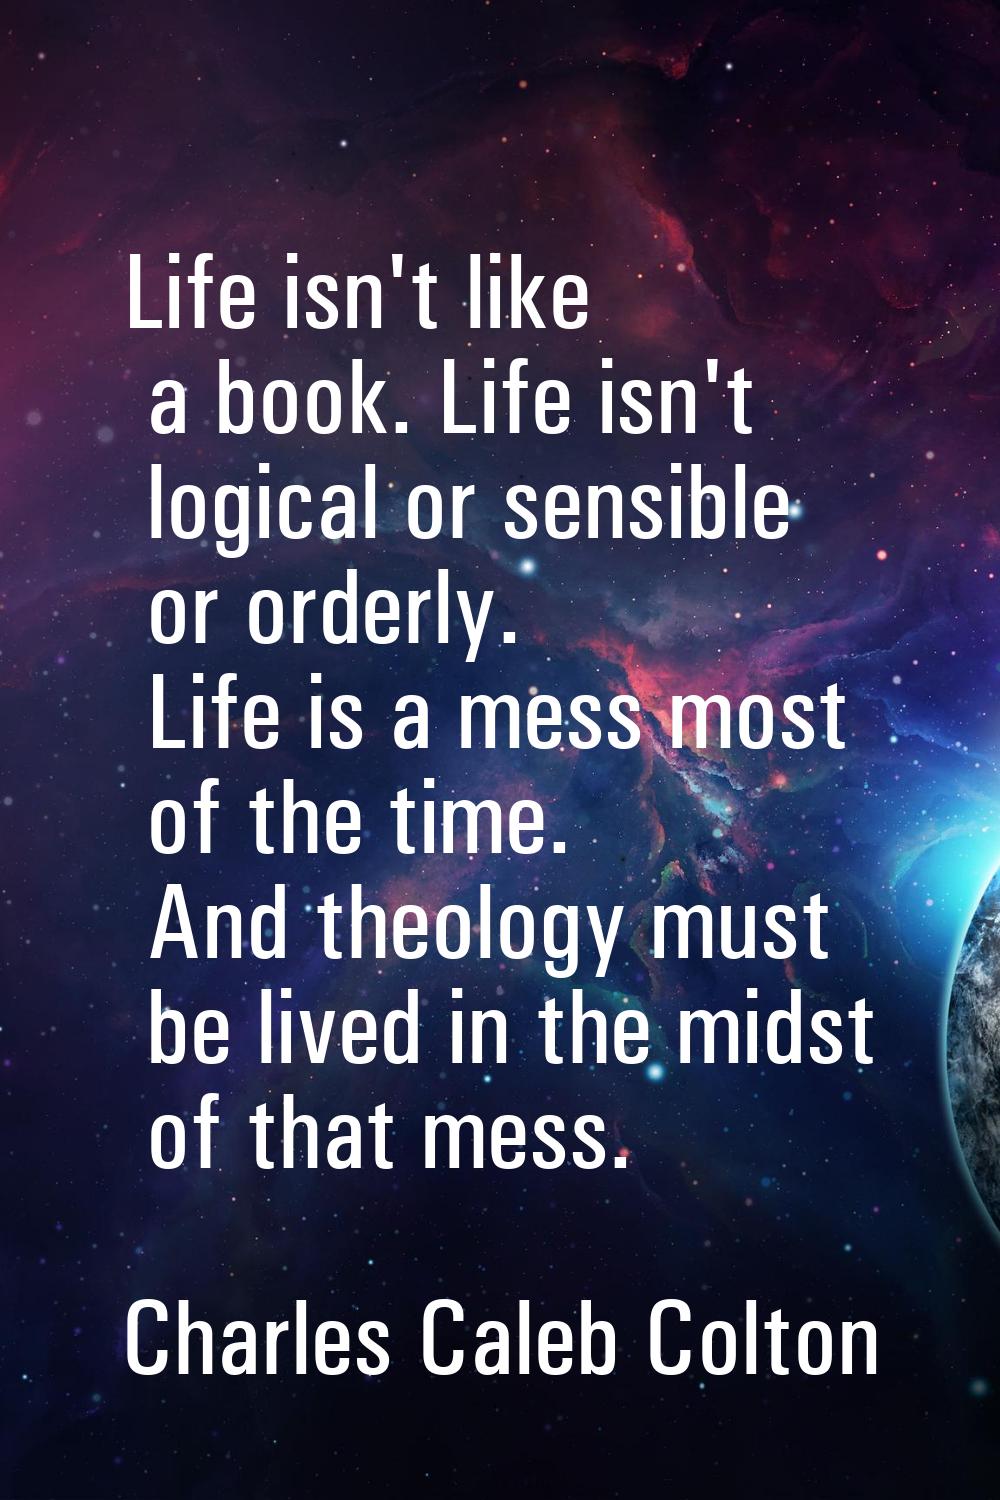 Life isn't like a book. Life isn't logical or sensible or orderly. Life is a mess most of the time.